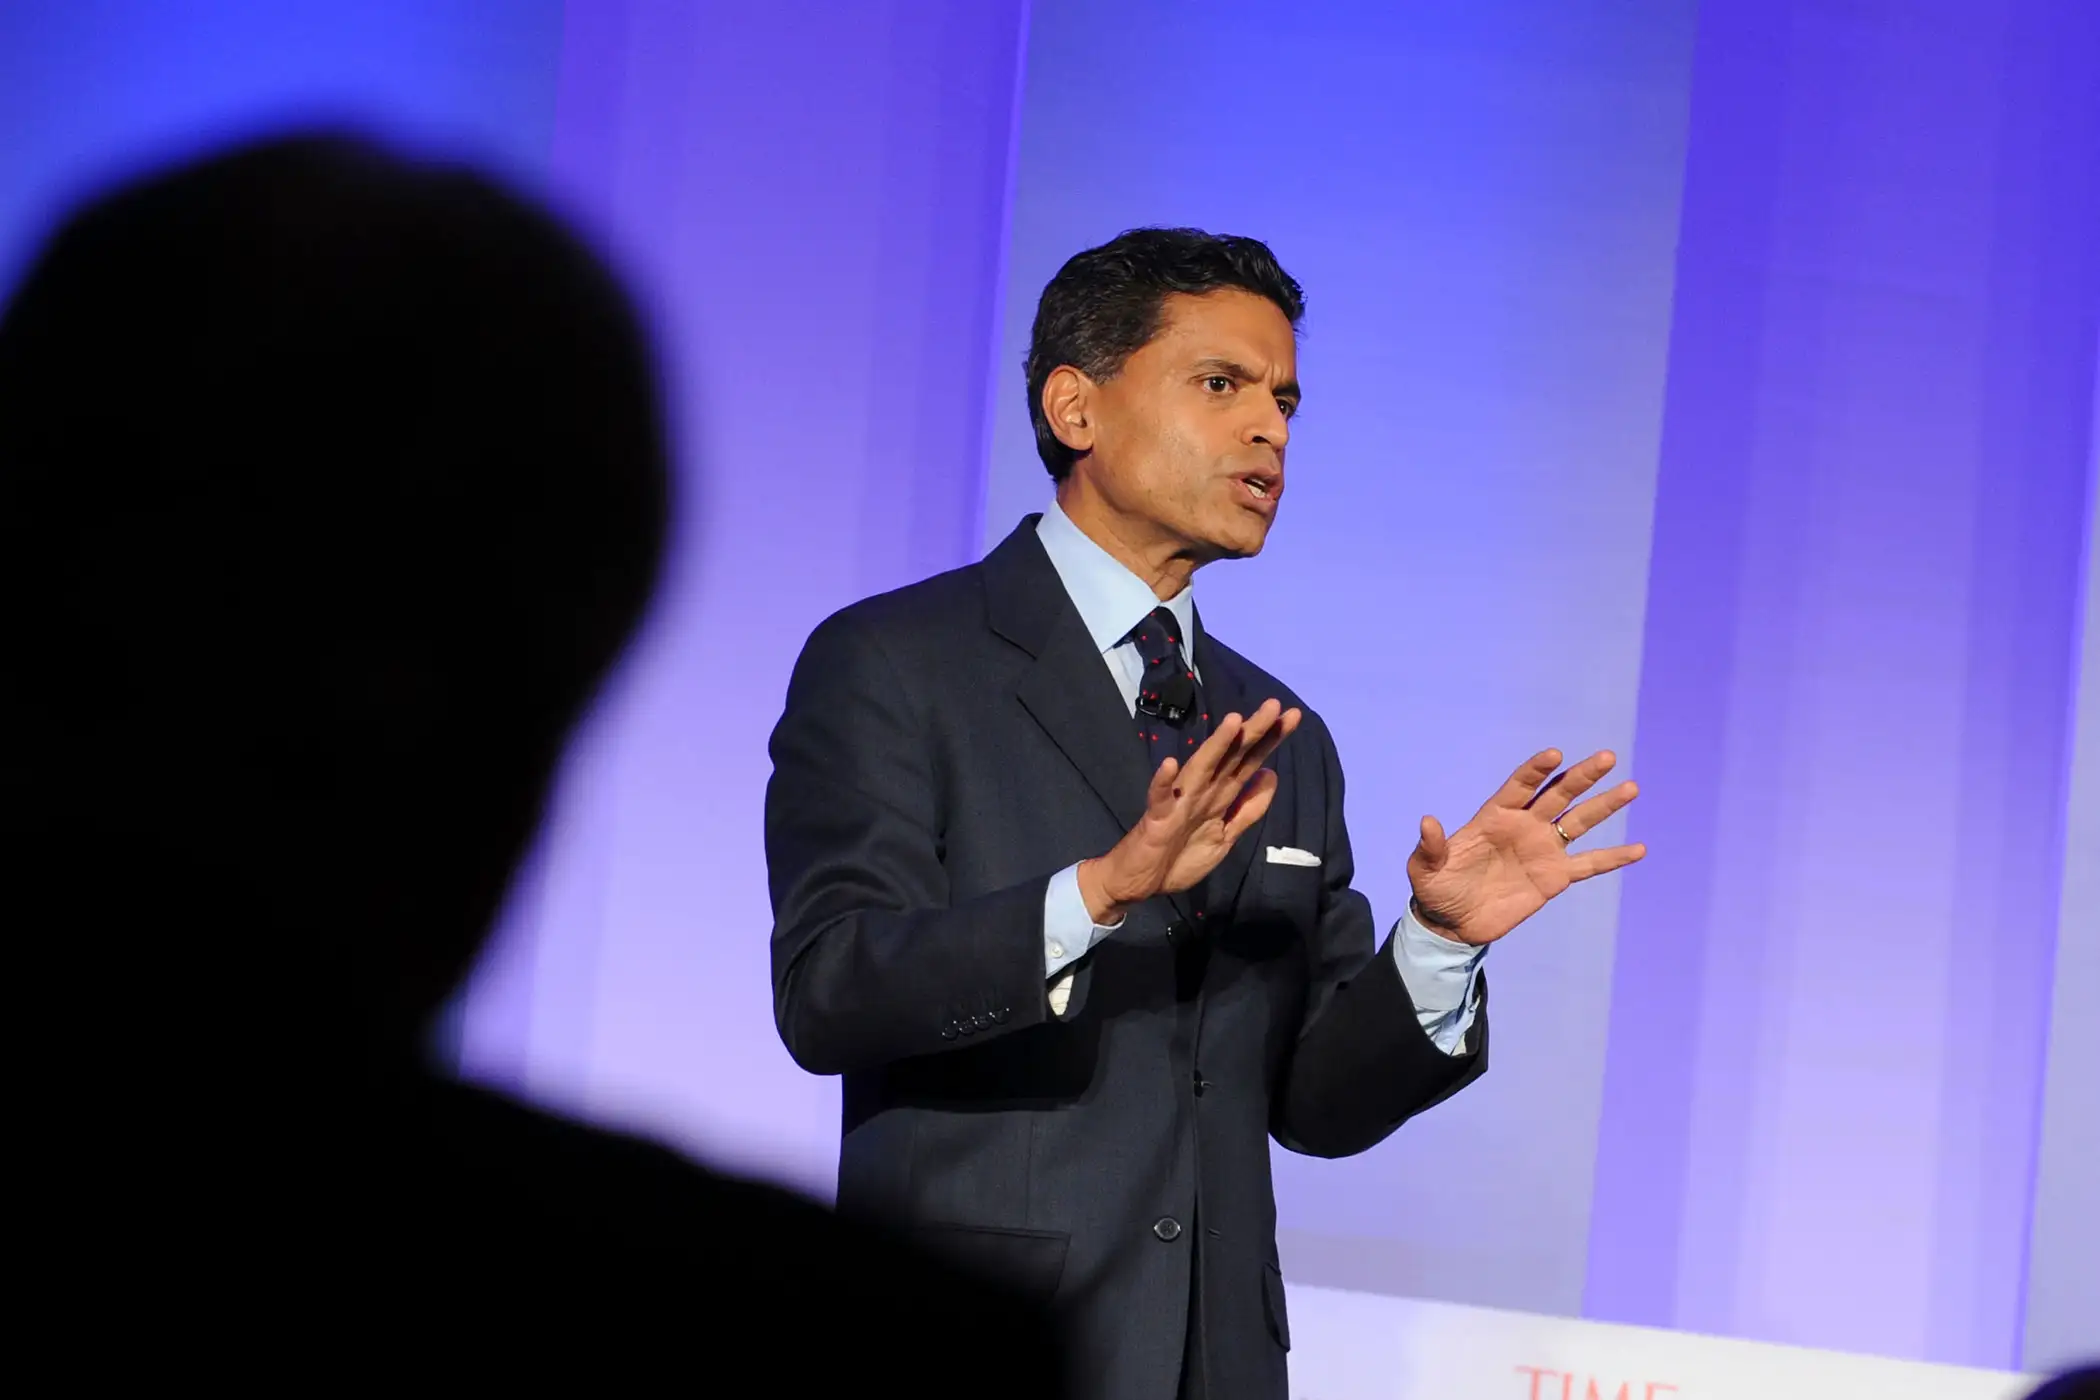 Fareed Zakaria speaks at the TIME Summit On Higher Education Day 1 at Time Warner Center on September 19, 2013 in New York City.